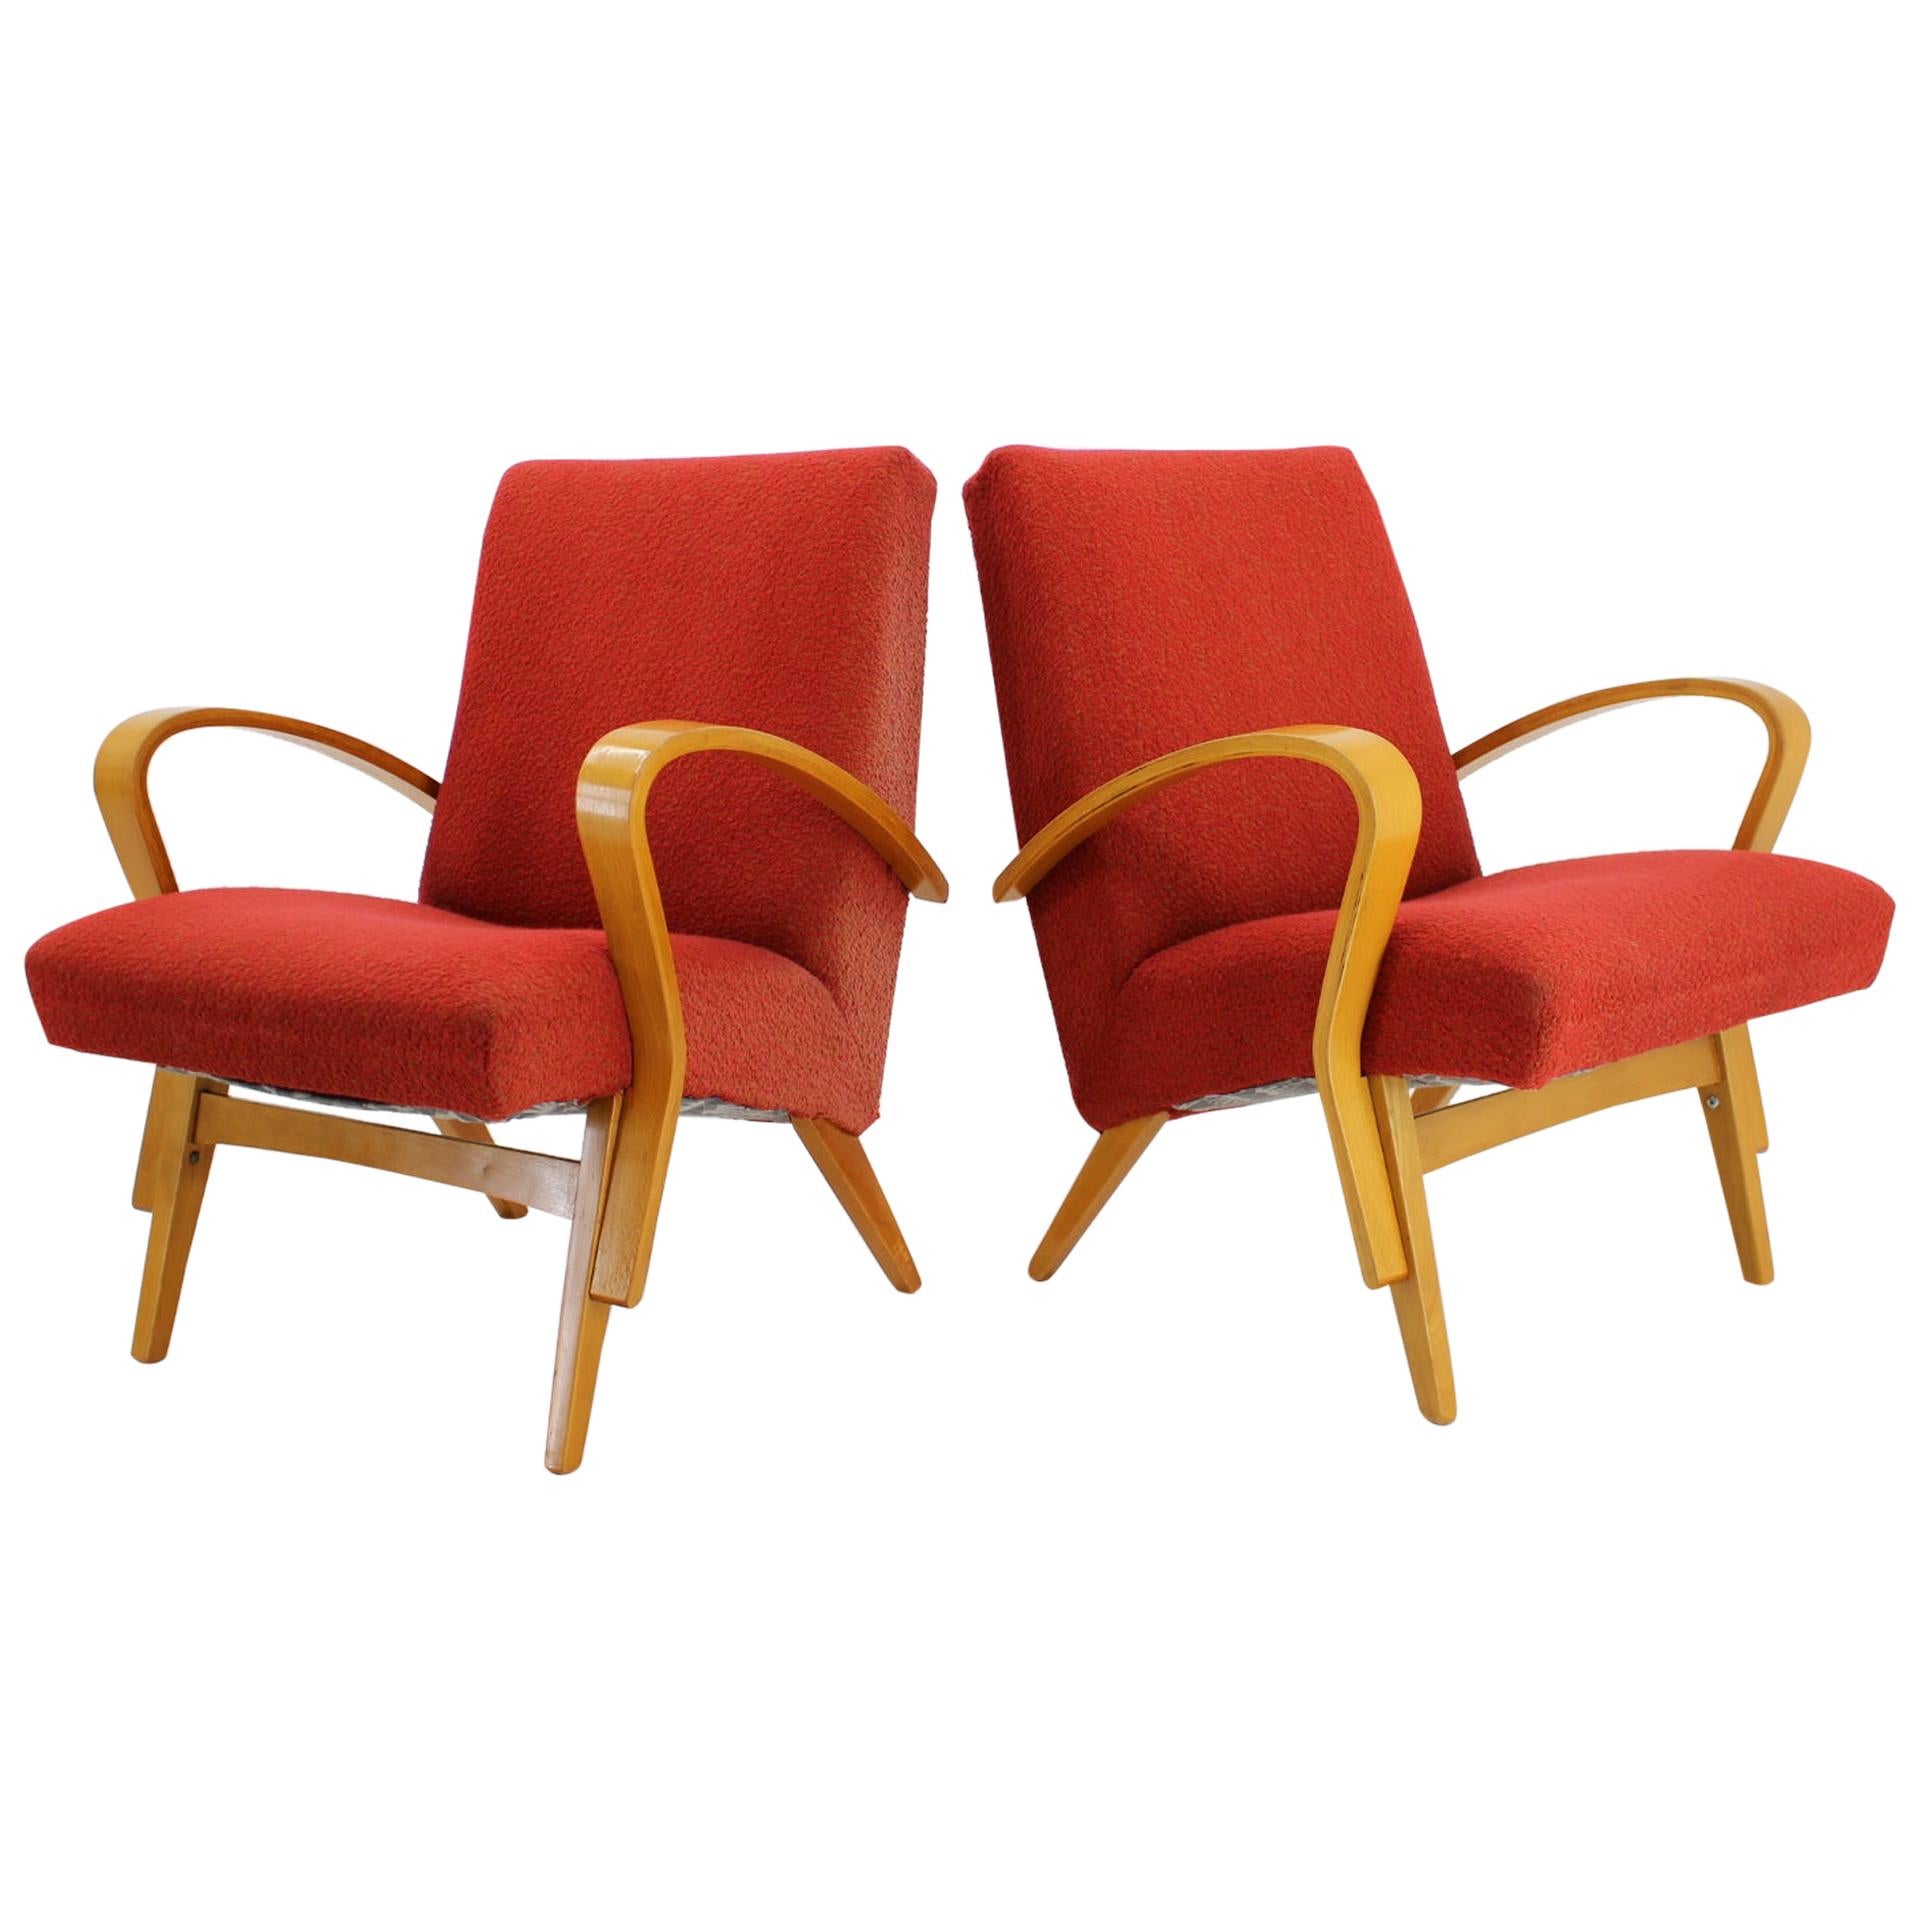 1960s Frantisek Jirak Bentwood Lounge Chairs, Set of 2 For Sale